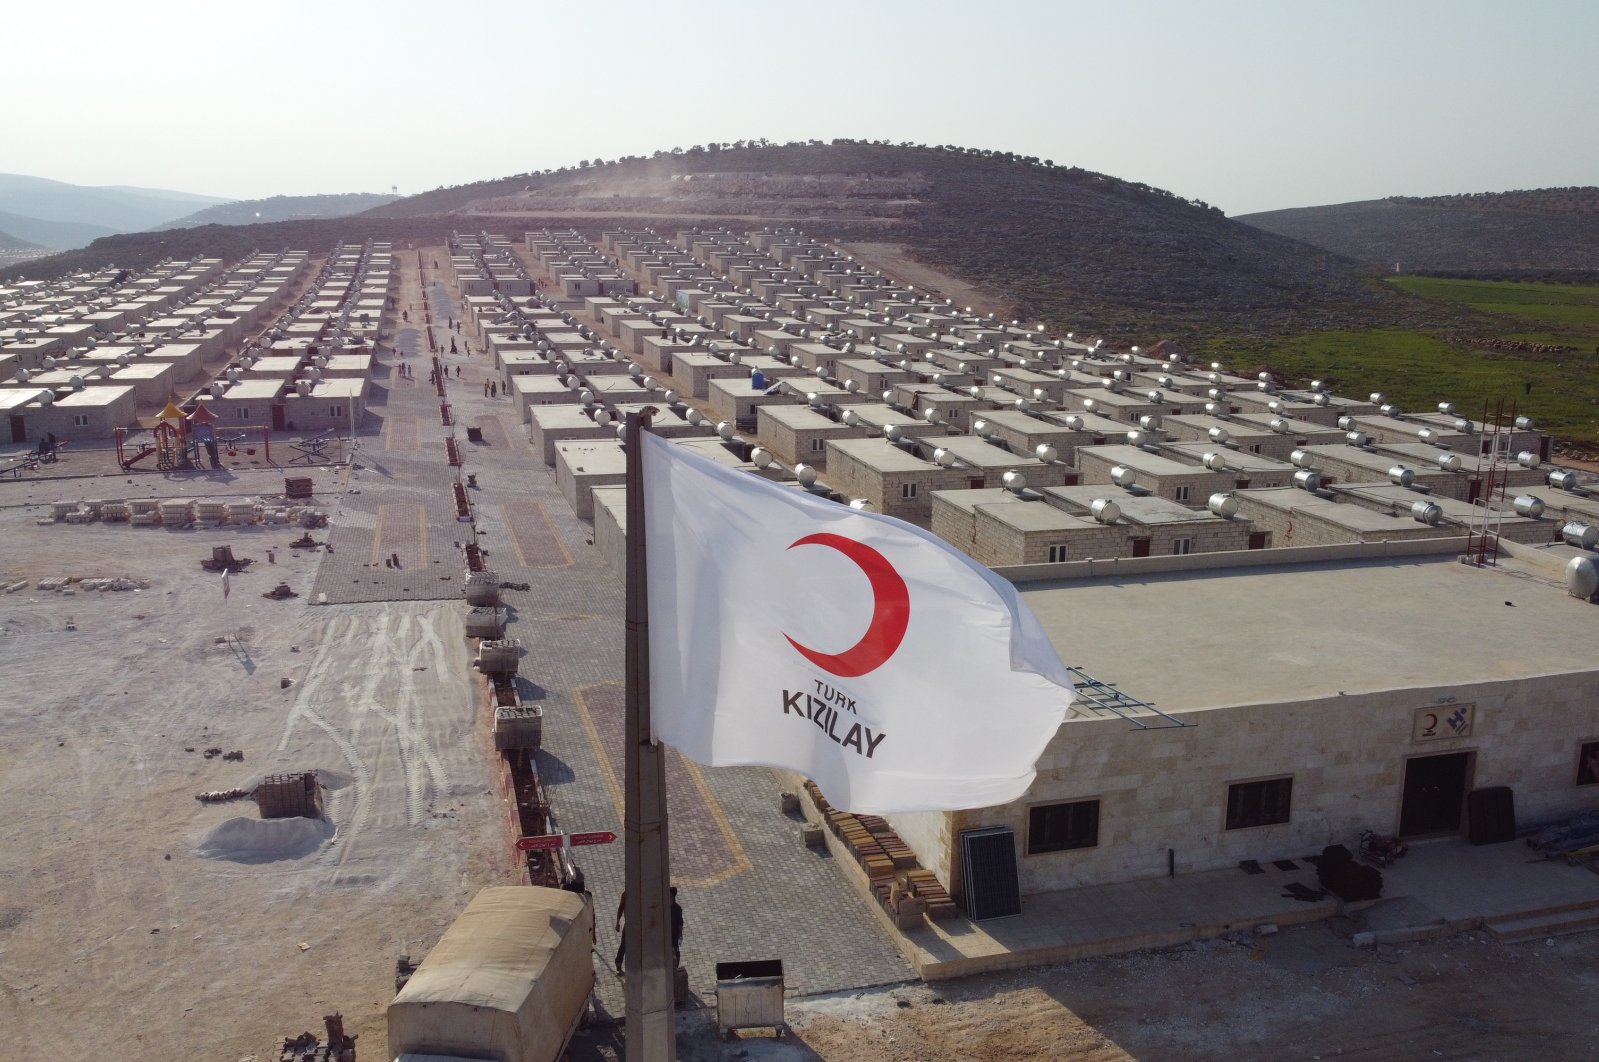 A Turkish Red Crescent (Kızılay) flag waves over houses built by Kızılay for displaced Syrians in Sarmada, Idlib province, Syria, April 3, 2021. (AA Photo) 